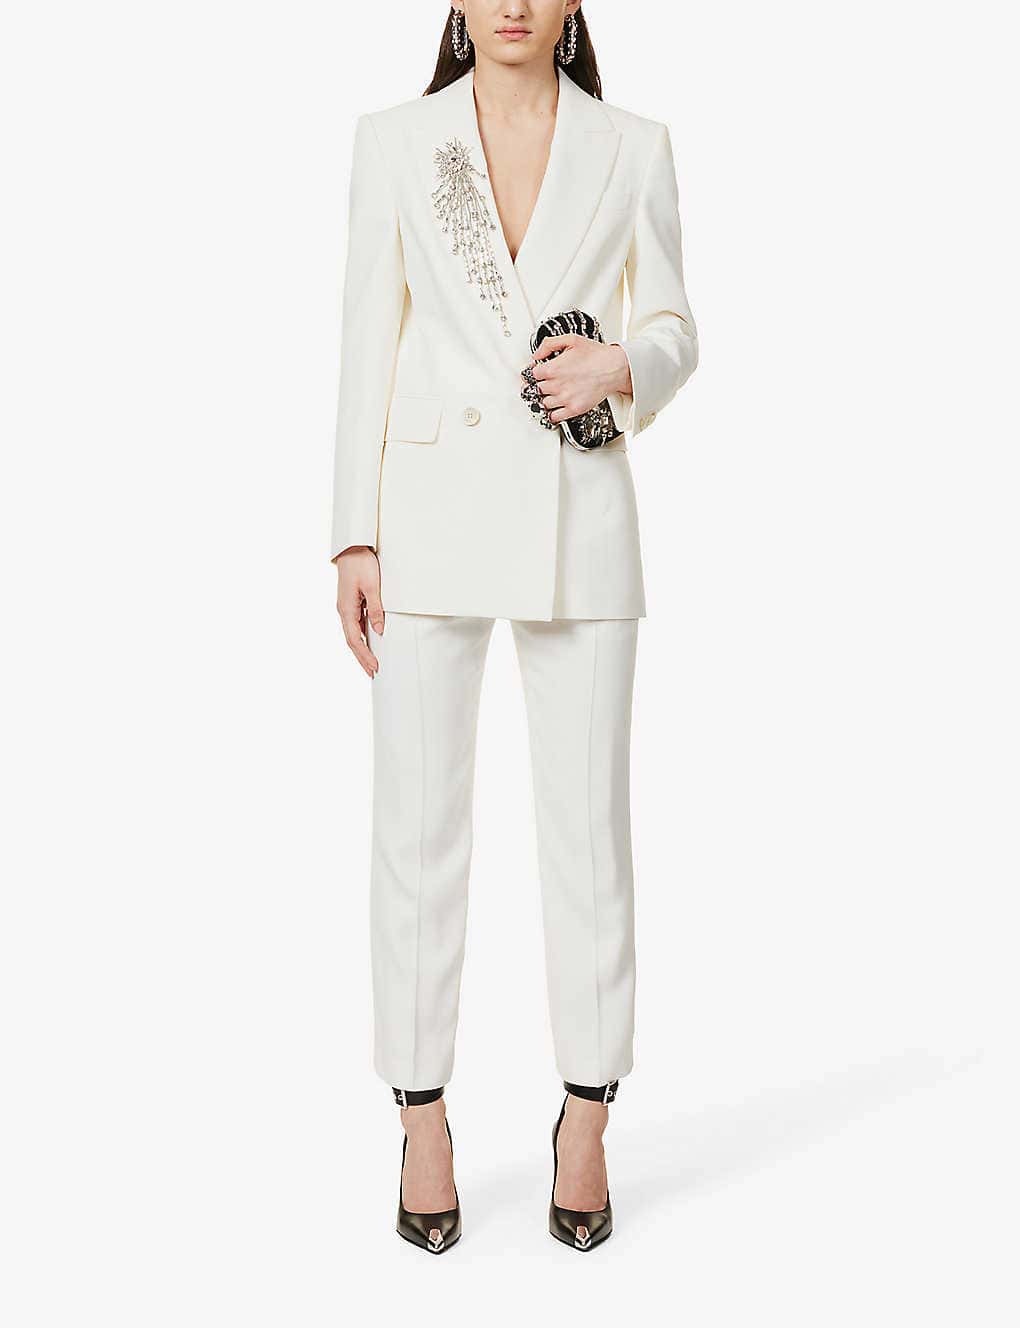 white suit with silver embellishments on coller 